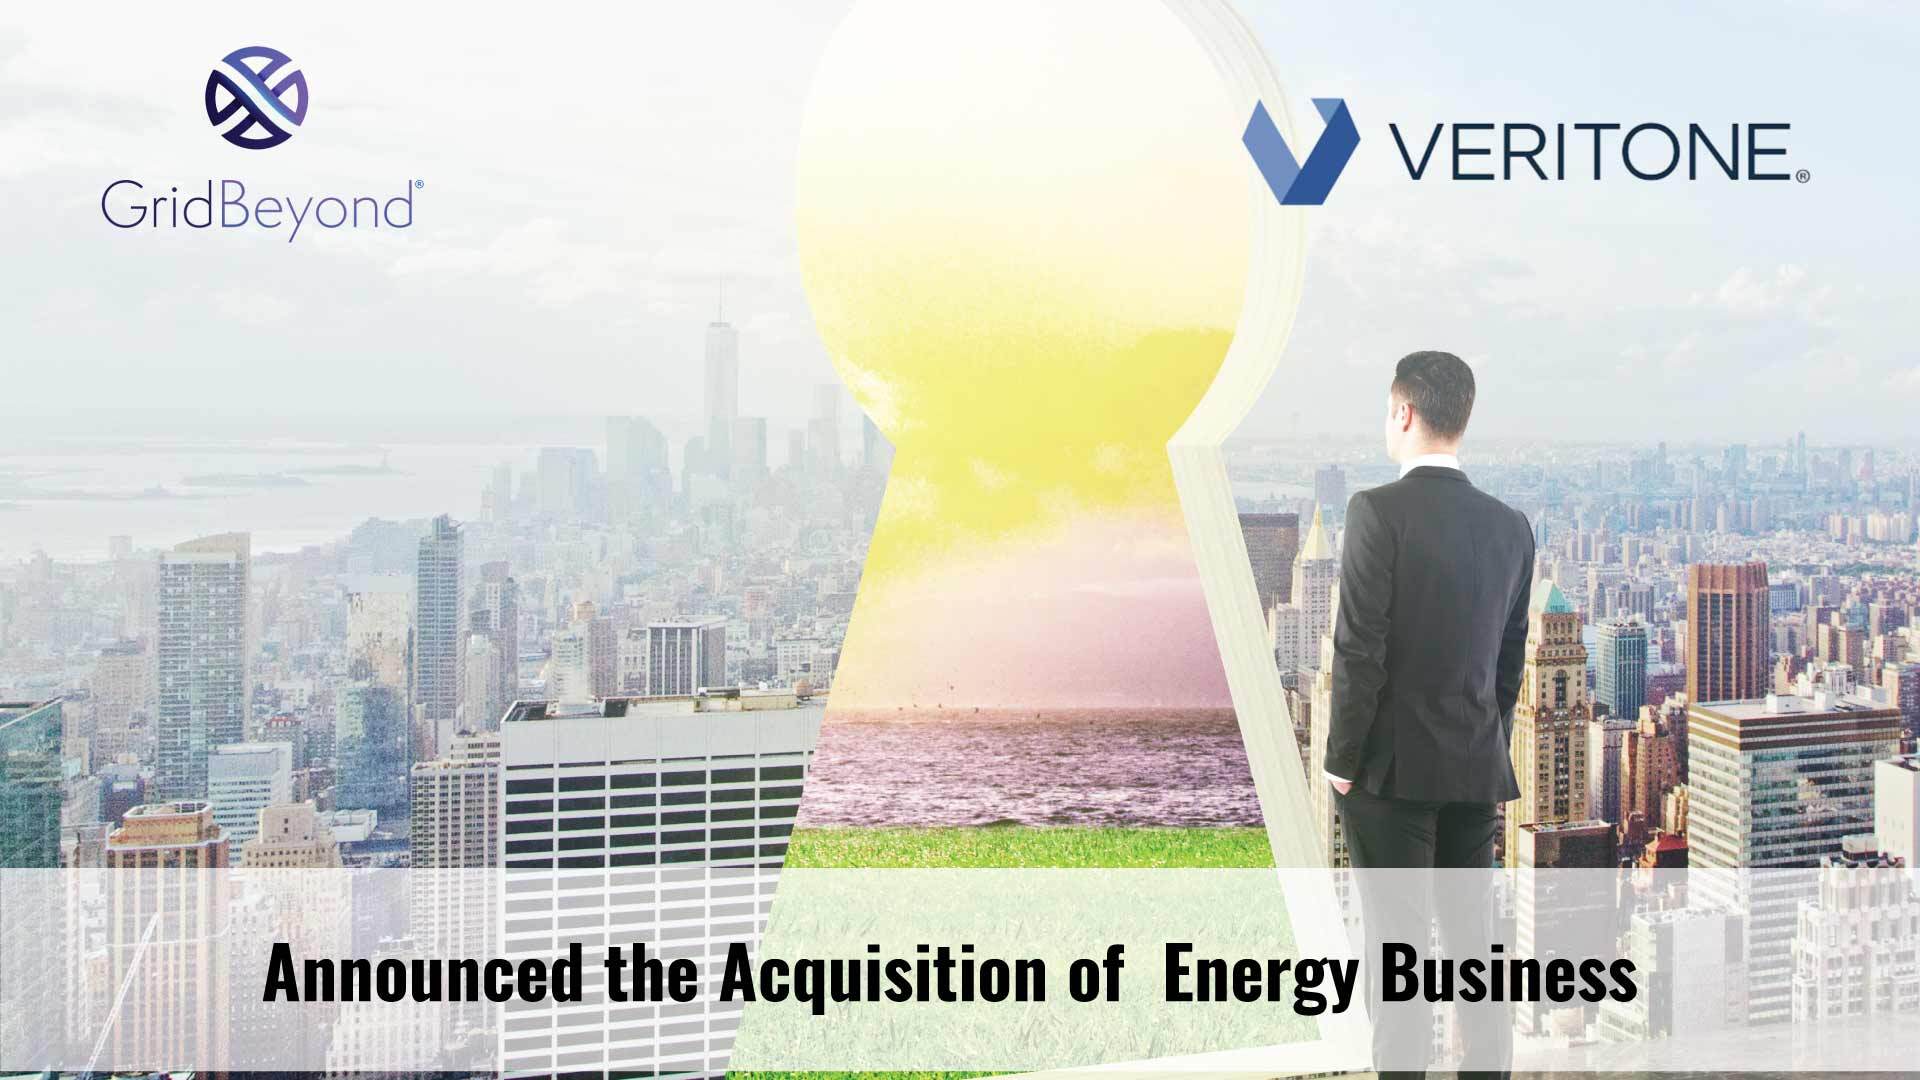 GridBeyond Acquires Veritone’s Energy Business